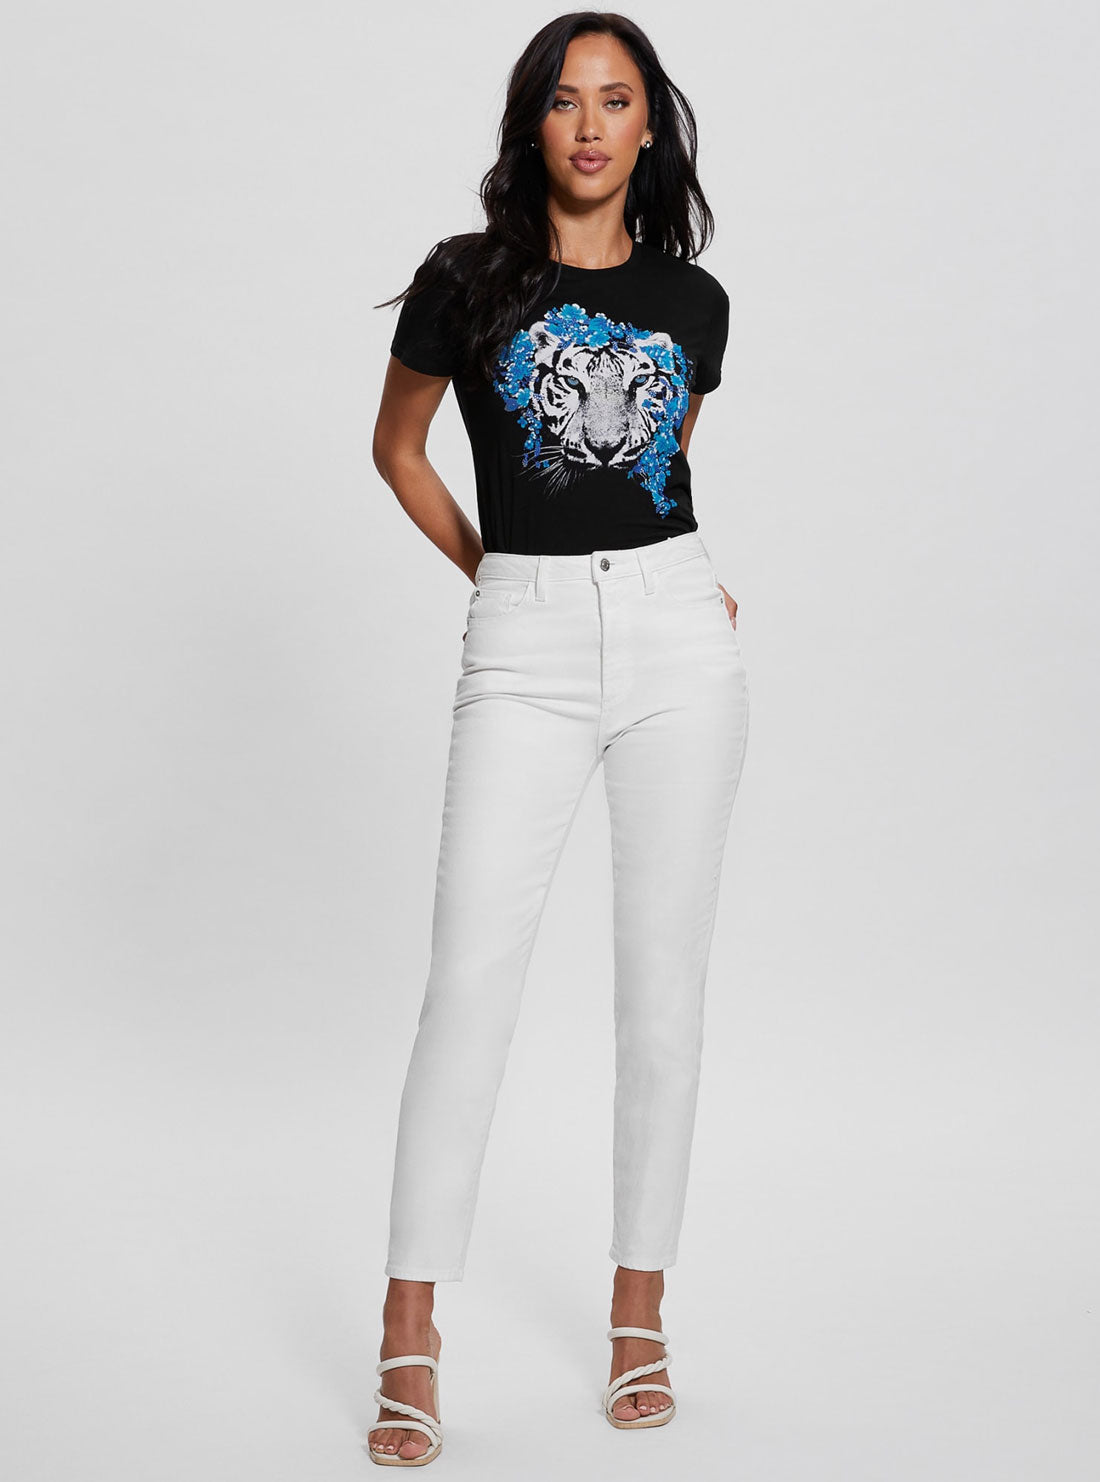 Black Floral Tiger Easy T-Shirt | GUESS Women's Apparel | full view